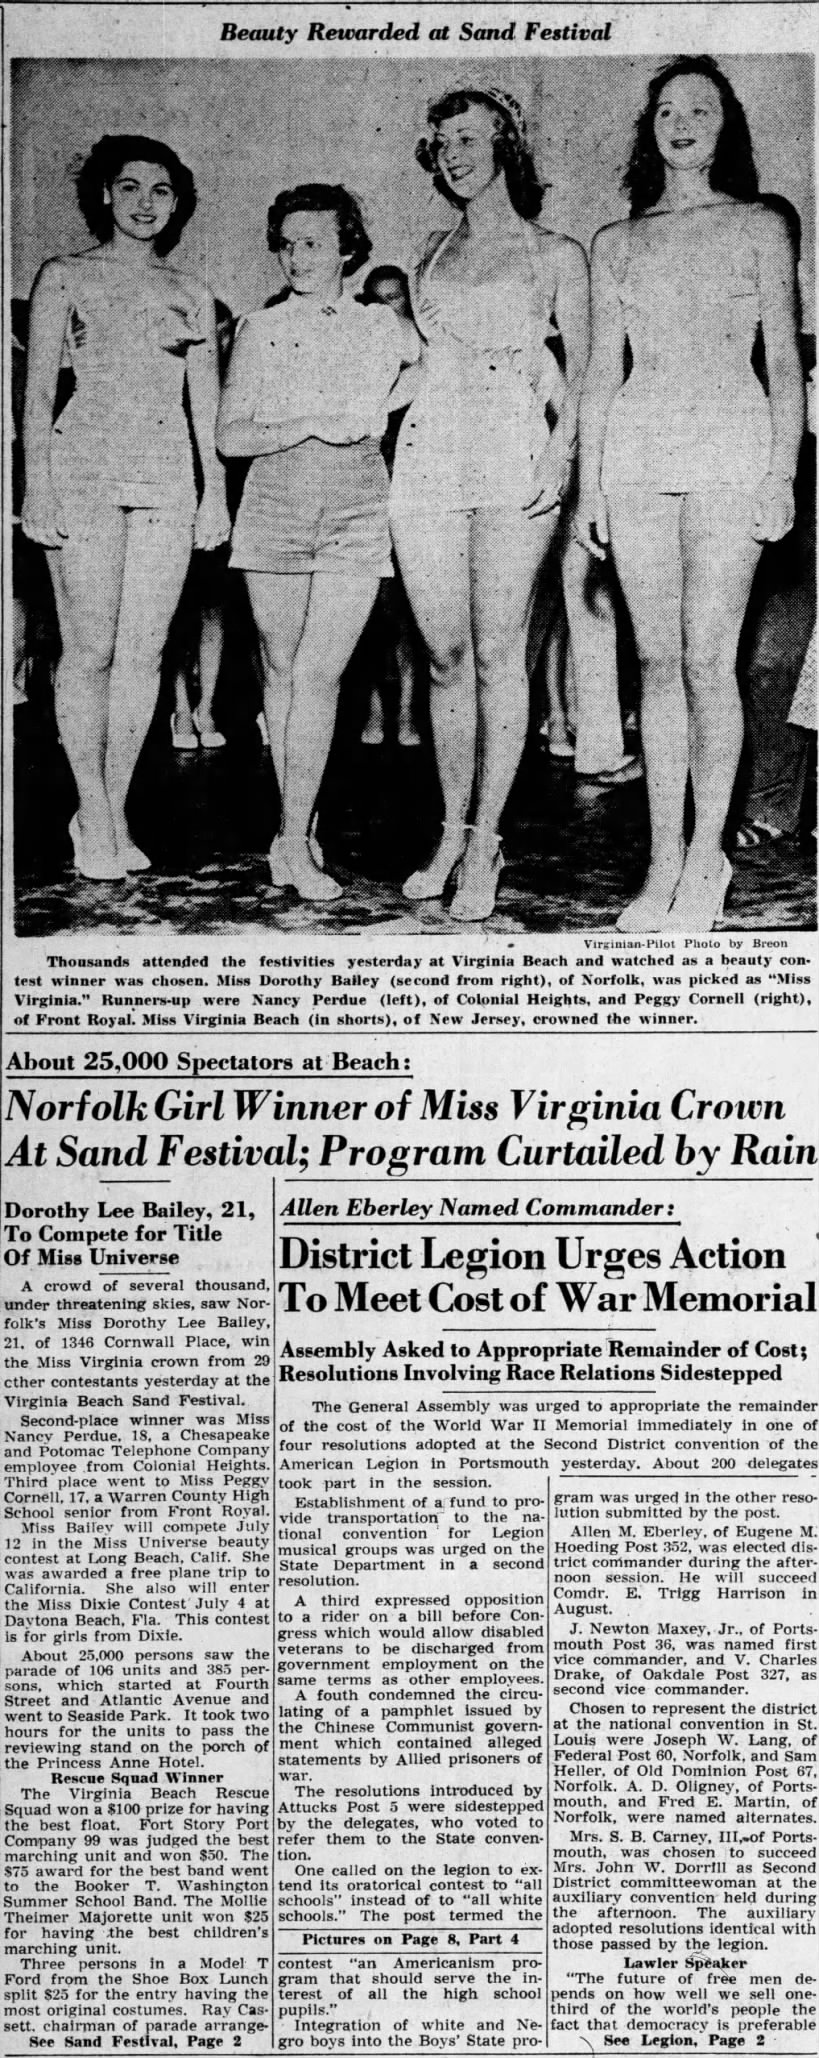 Peggy Cornell 2nd runner up in Miss VA contest, June, 1953.